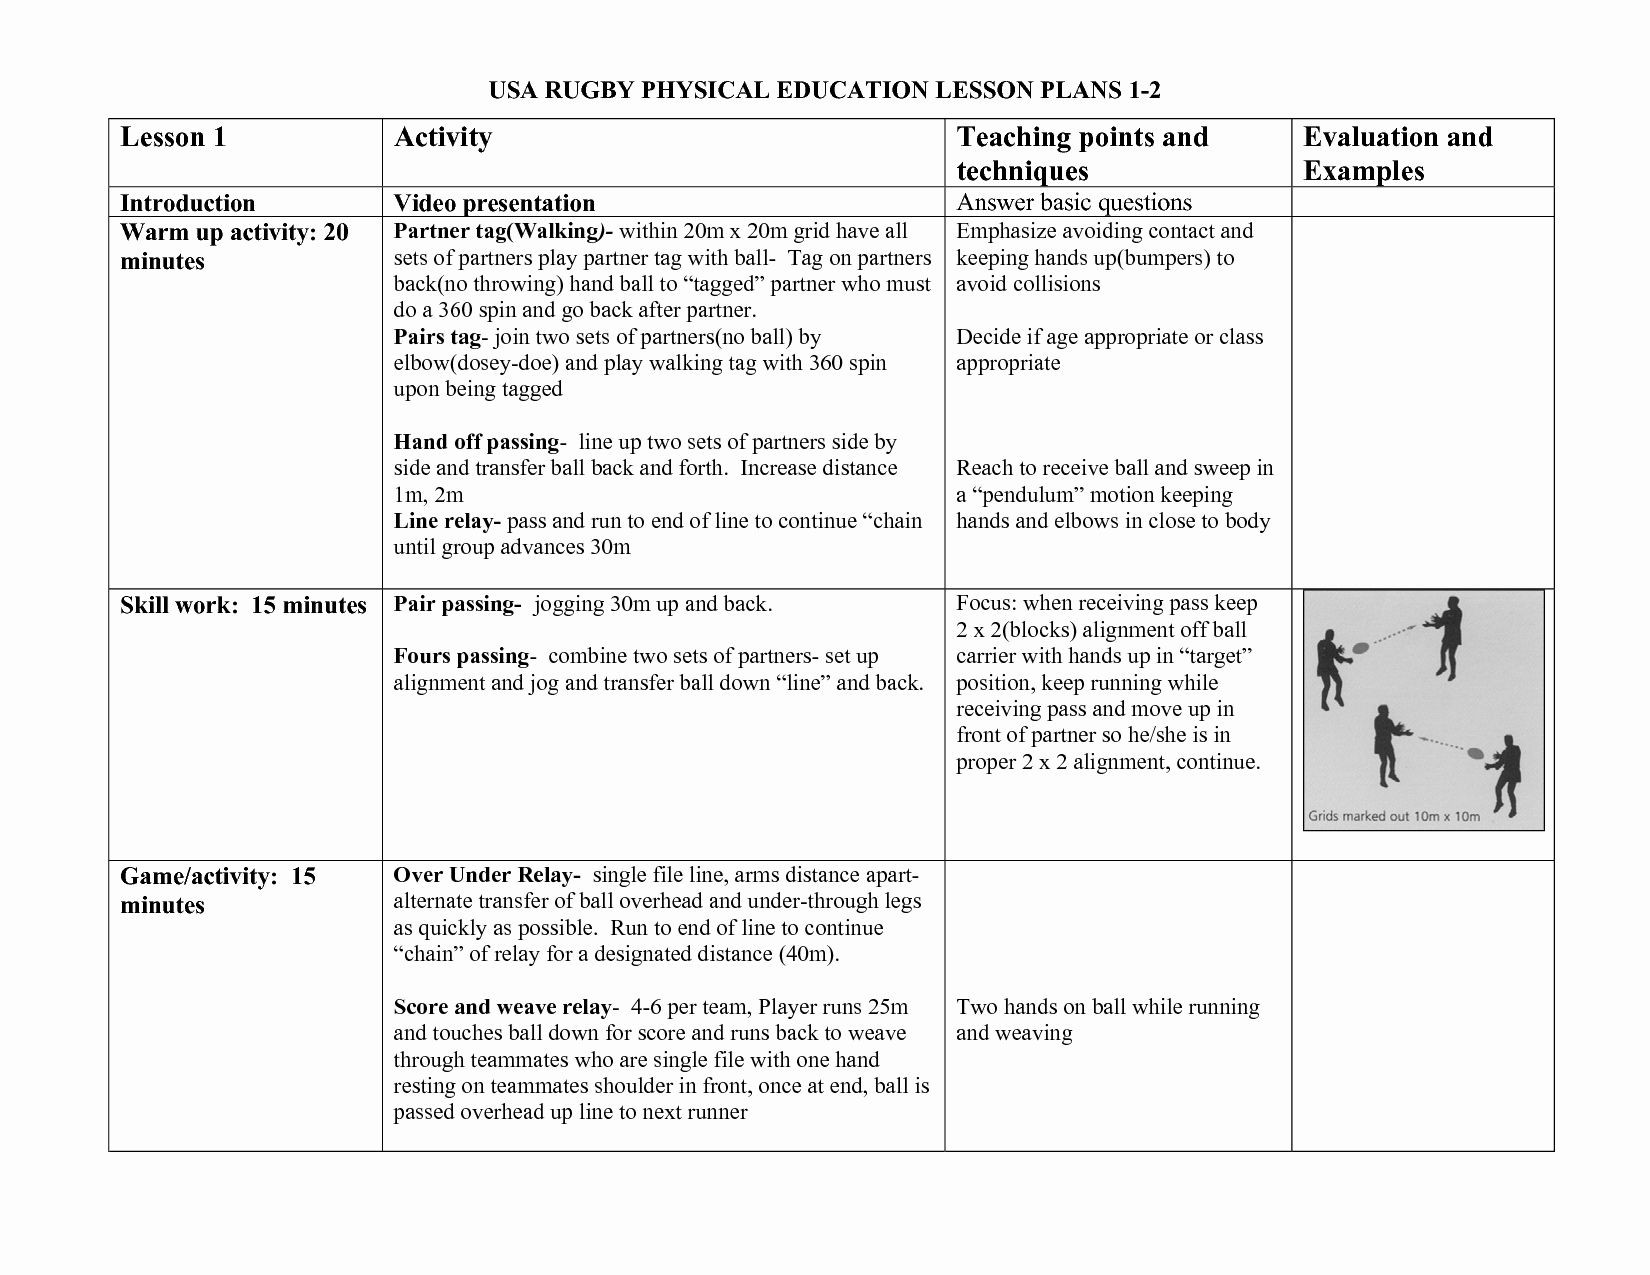 Pe Lesson Plans Physical Education Lesson Plan Template In 2020